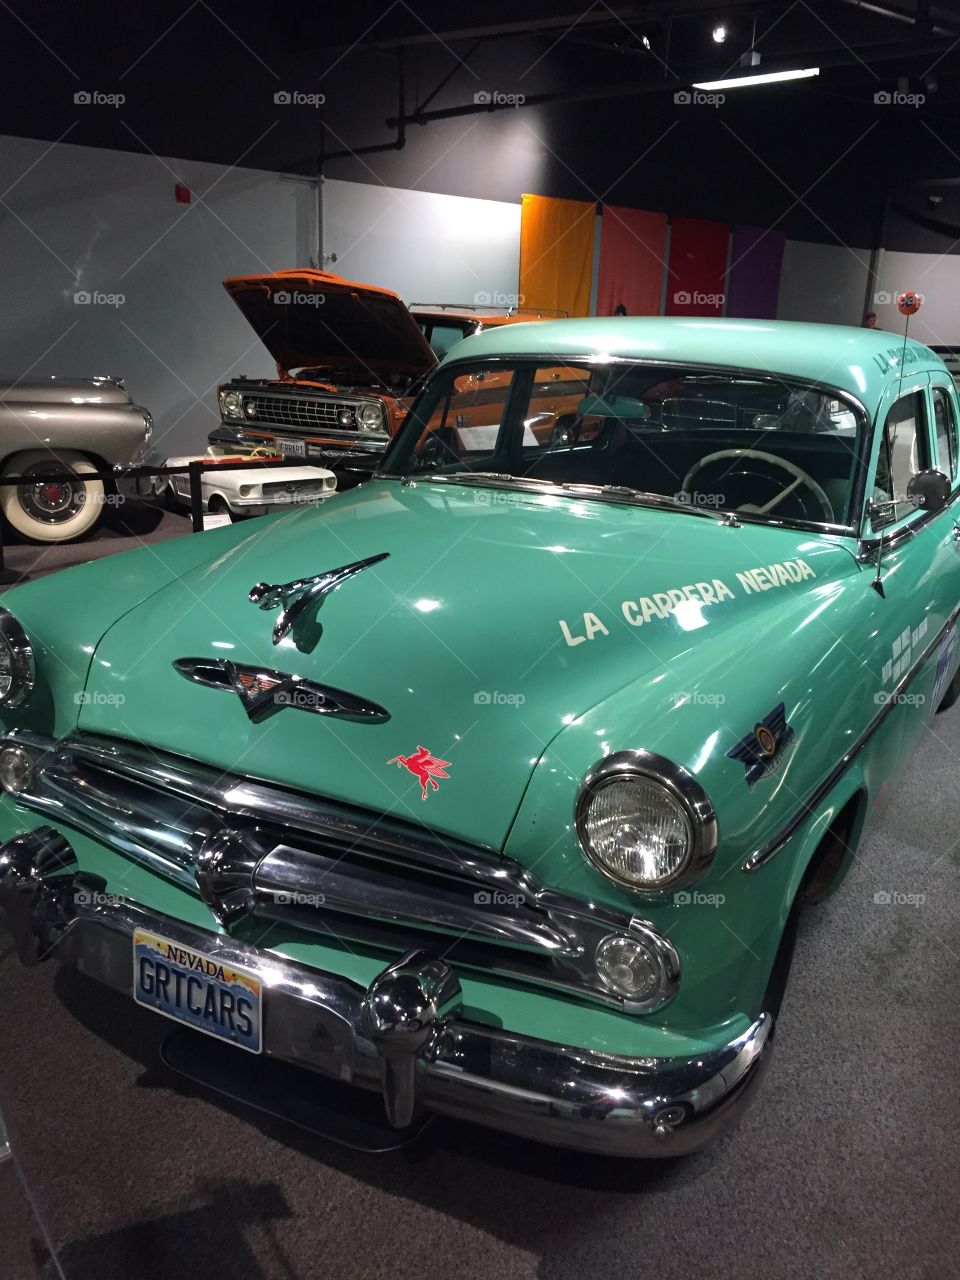 Car Museum in Reno, Nevada. These old cars are awesome! They are kept in excellent condition, and colors are amazing!